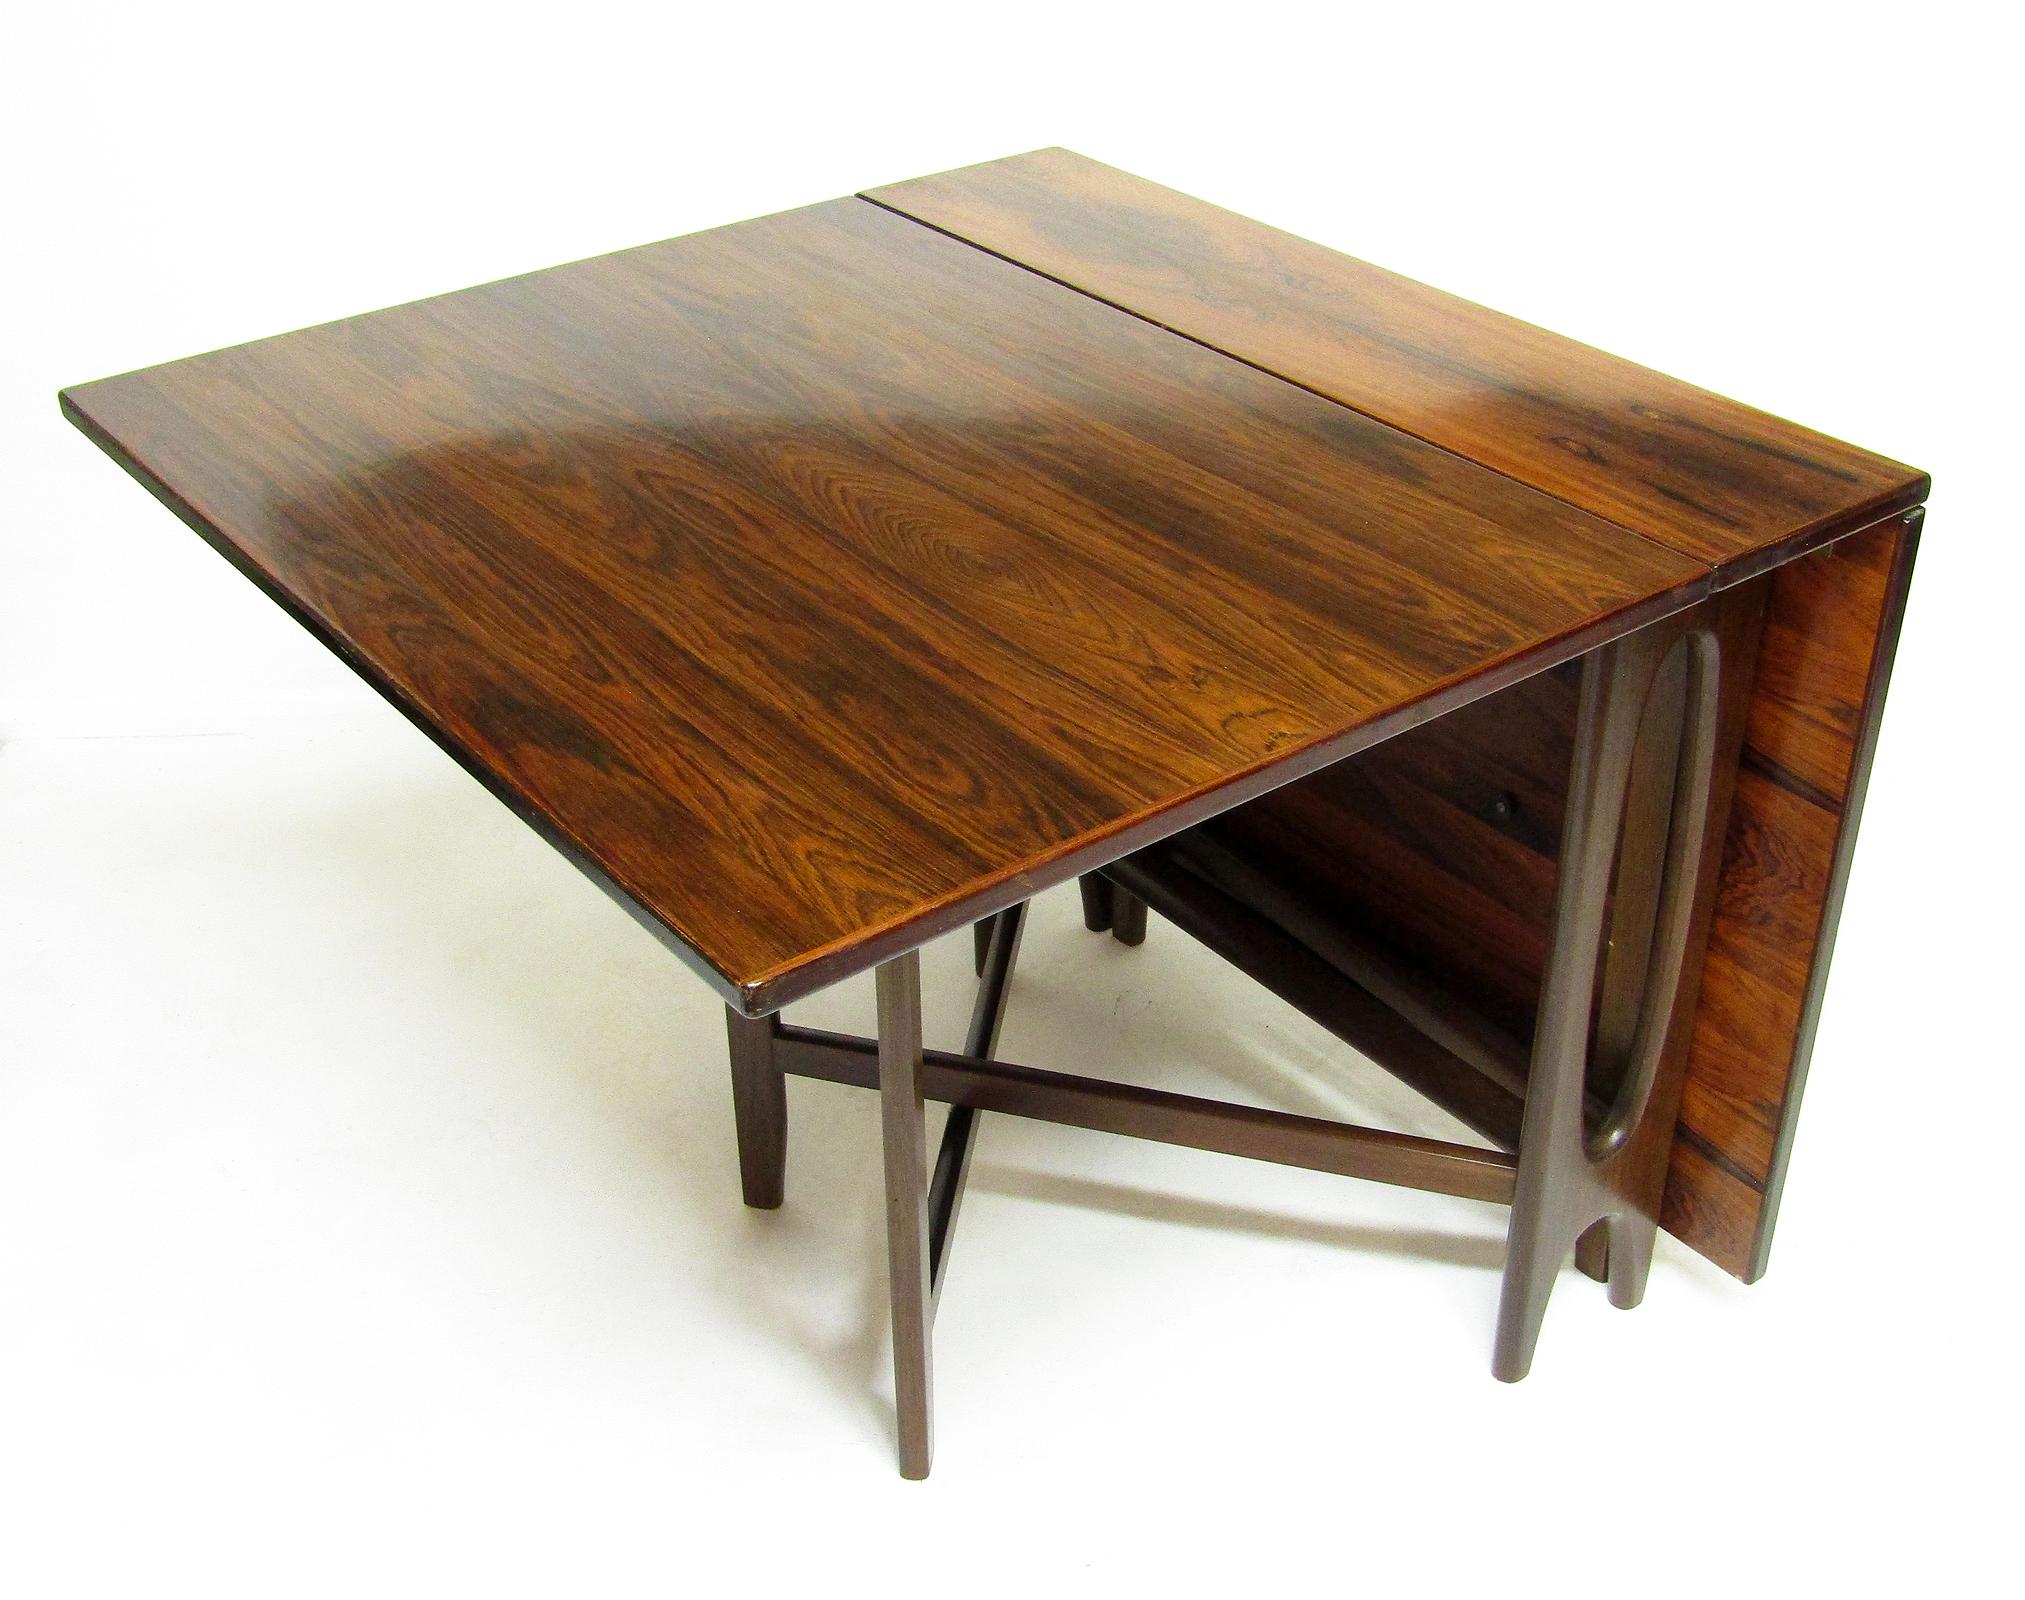 1970s Scandinavian Drop-Leaf Rio Rosewood Extending Dining Table by Bendt Winge In Good Condition For Sale In Shepperton, Surrey